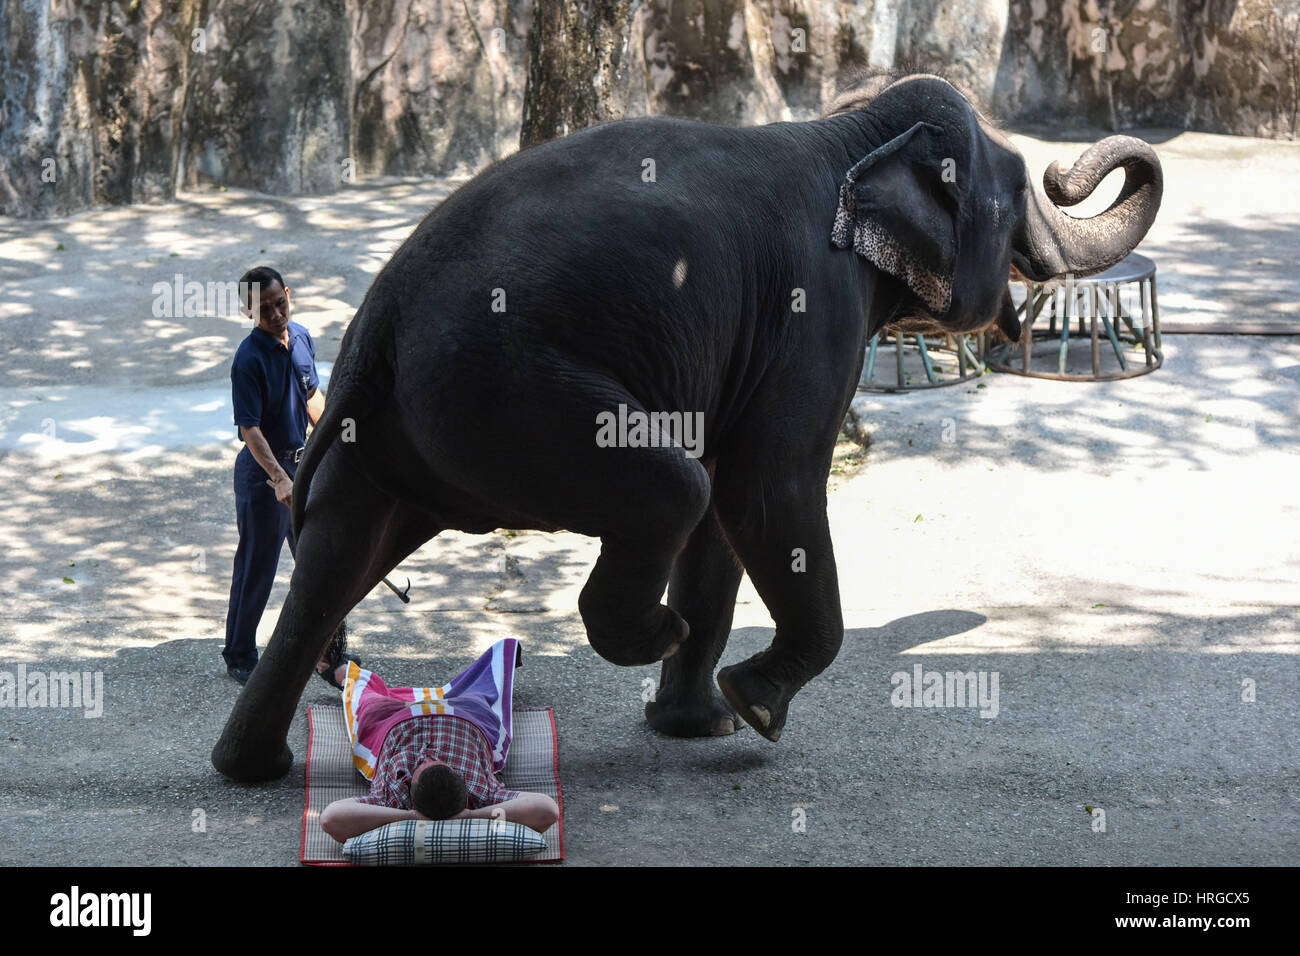 Chonburi. 1st Mar, 2017. An Asian elephant walks across a tourist during an elephant show at a zoo in central Thailand's Chonburi Province, March 1, 2017. In Thailand, elephant-related entertainments serve as an important source of tourism revenue. Although elephant domestication has existed for centuries, controversies over abuses during elephant training and performance still occur from time to time. Credit: Li Mangmang/Xinhua/Alamy Live News Stock Photo